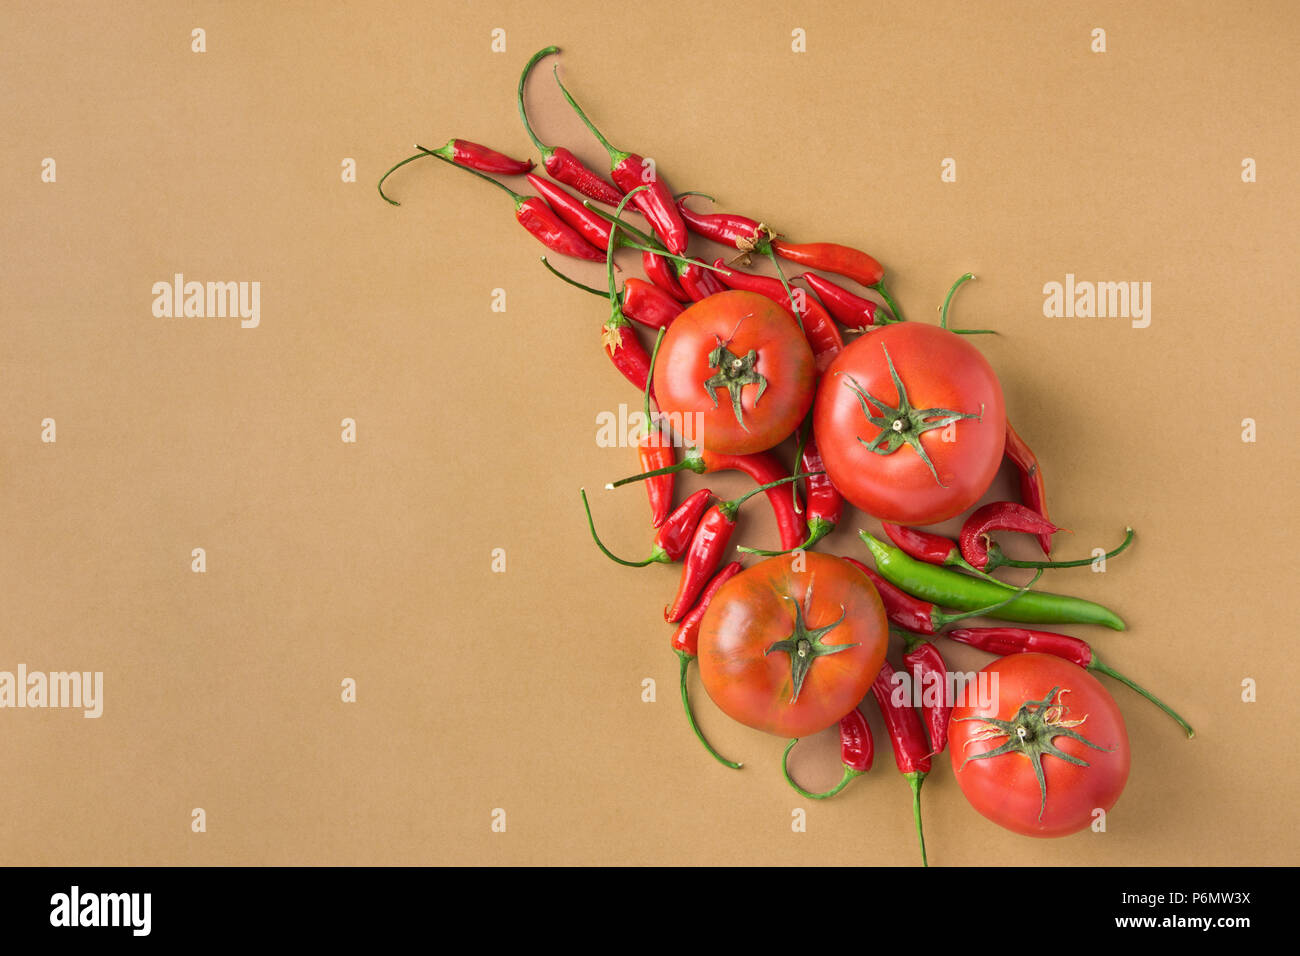 Fresh Ripe Organic Red Tomatoes Hot Chili Peppers Arranged on Brown Background. Mexican Italian Spanish Greek Mediterranean Cuisine. Healthy Diet Food Stock Photo